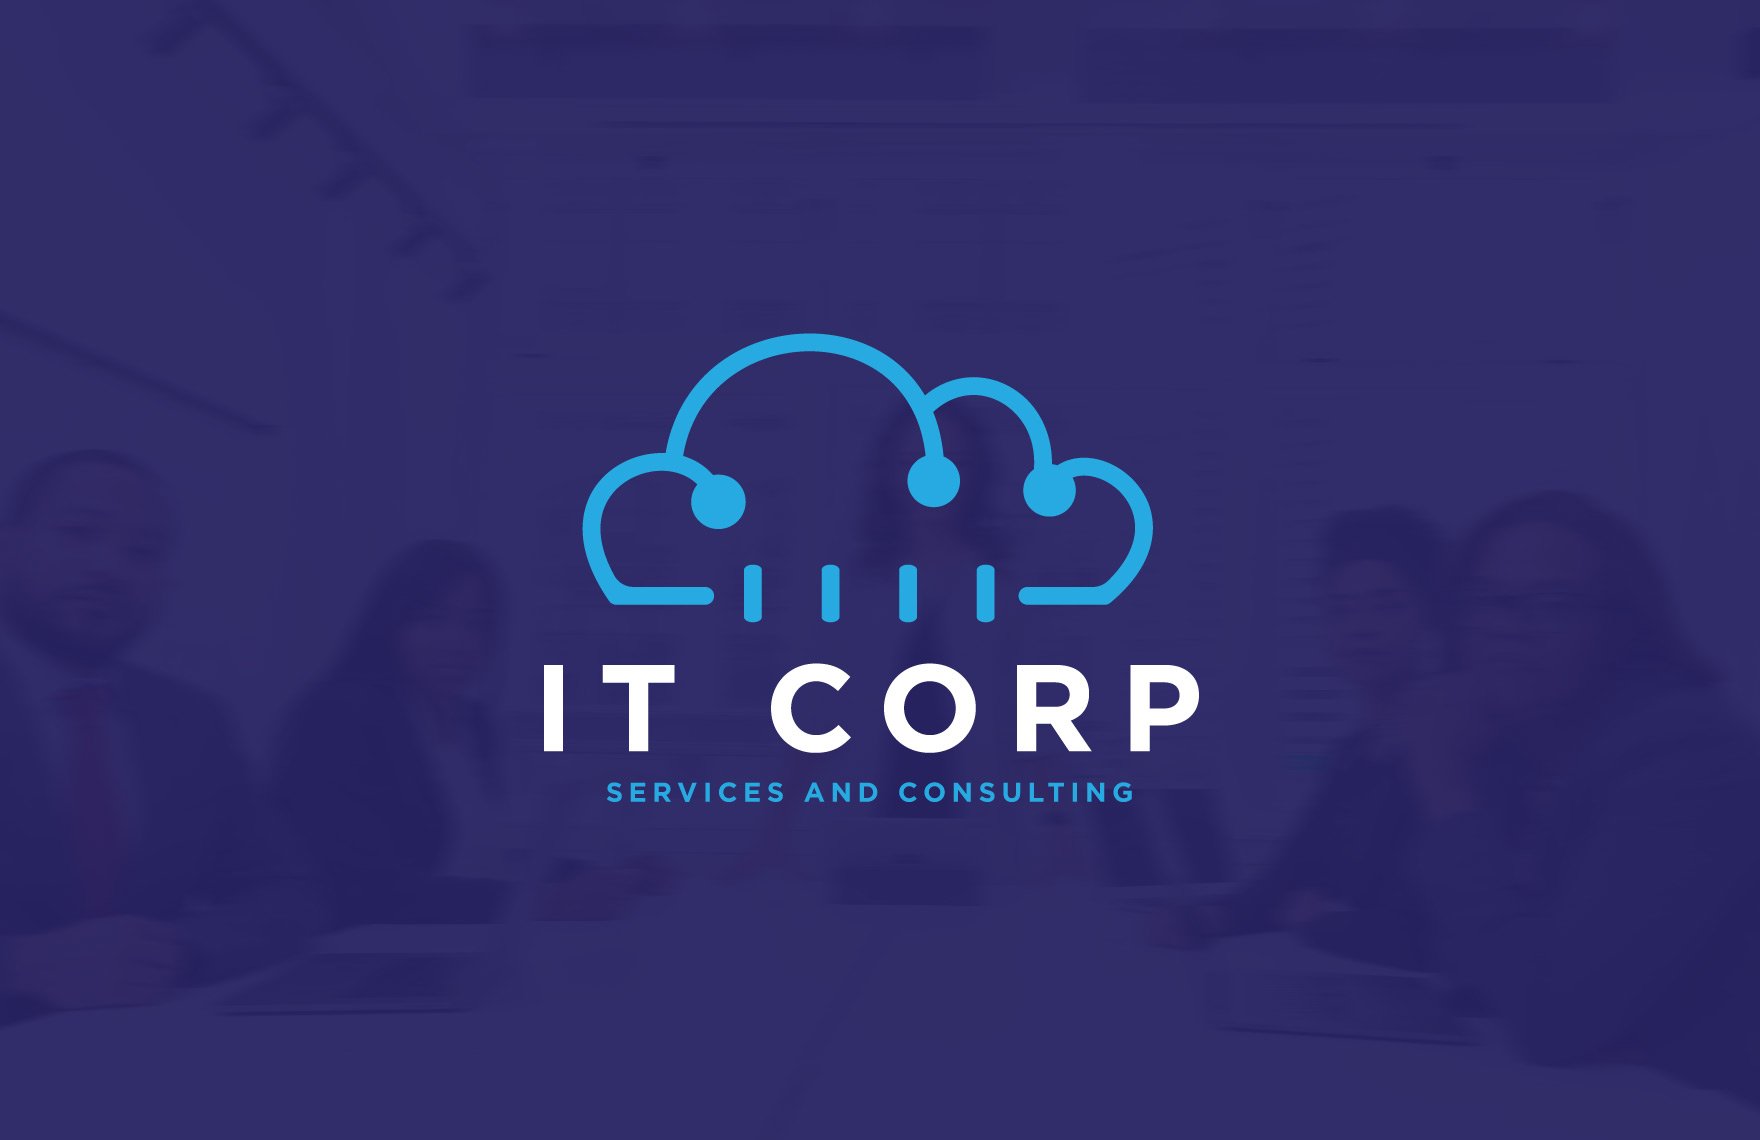 IT Cloud Consulting & Implementation Logo Template in Word, Illustrator, PSD, SVG, PNG